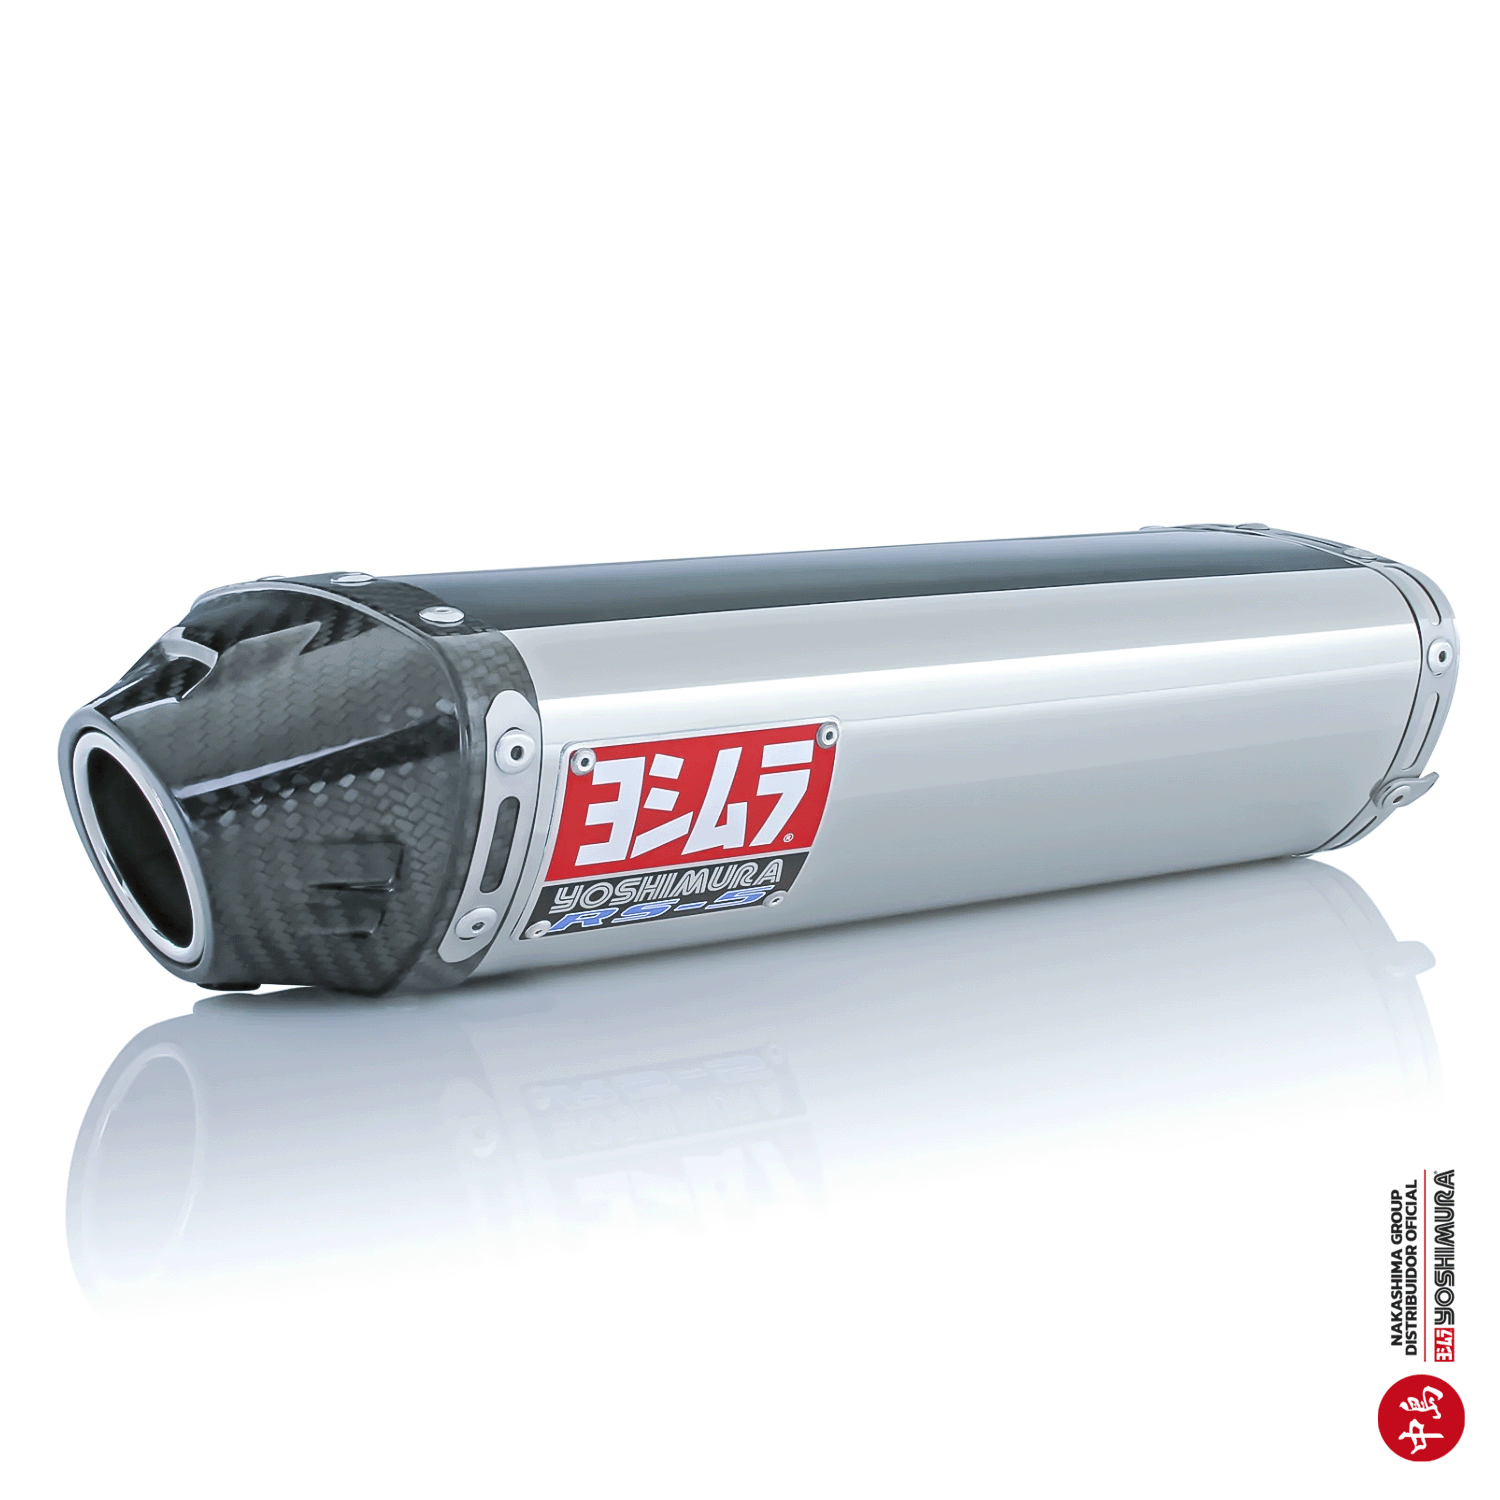 ZX-6R/RR 07-08 RS-5 Stainless Slip-On Exhaust, w/ Stainless Muffler